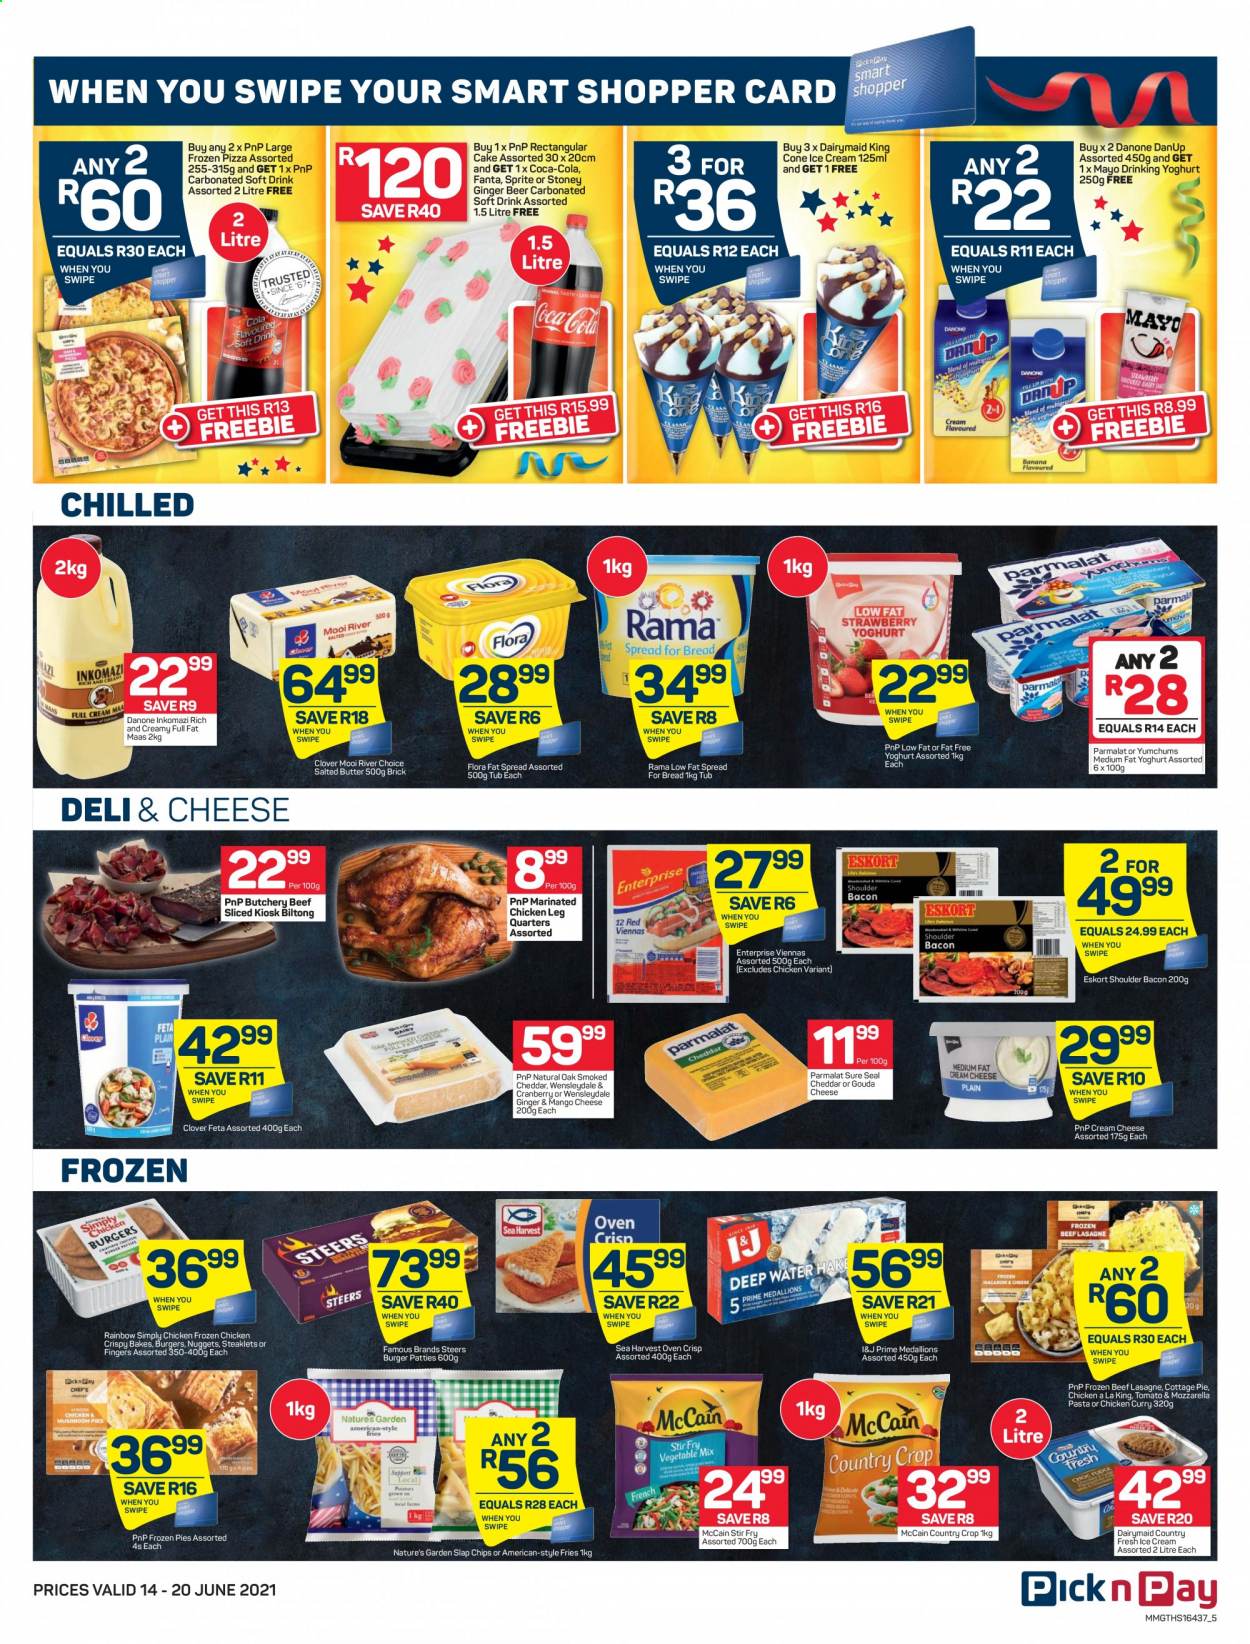 Pick n Pay specials - 06.14.2021 - 06.20.2021. 